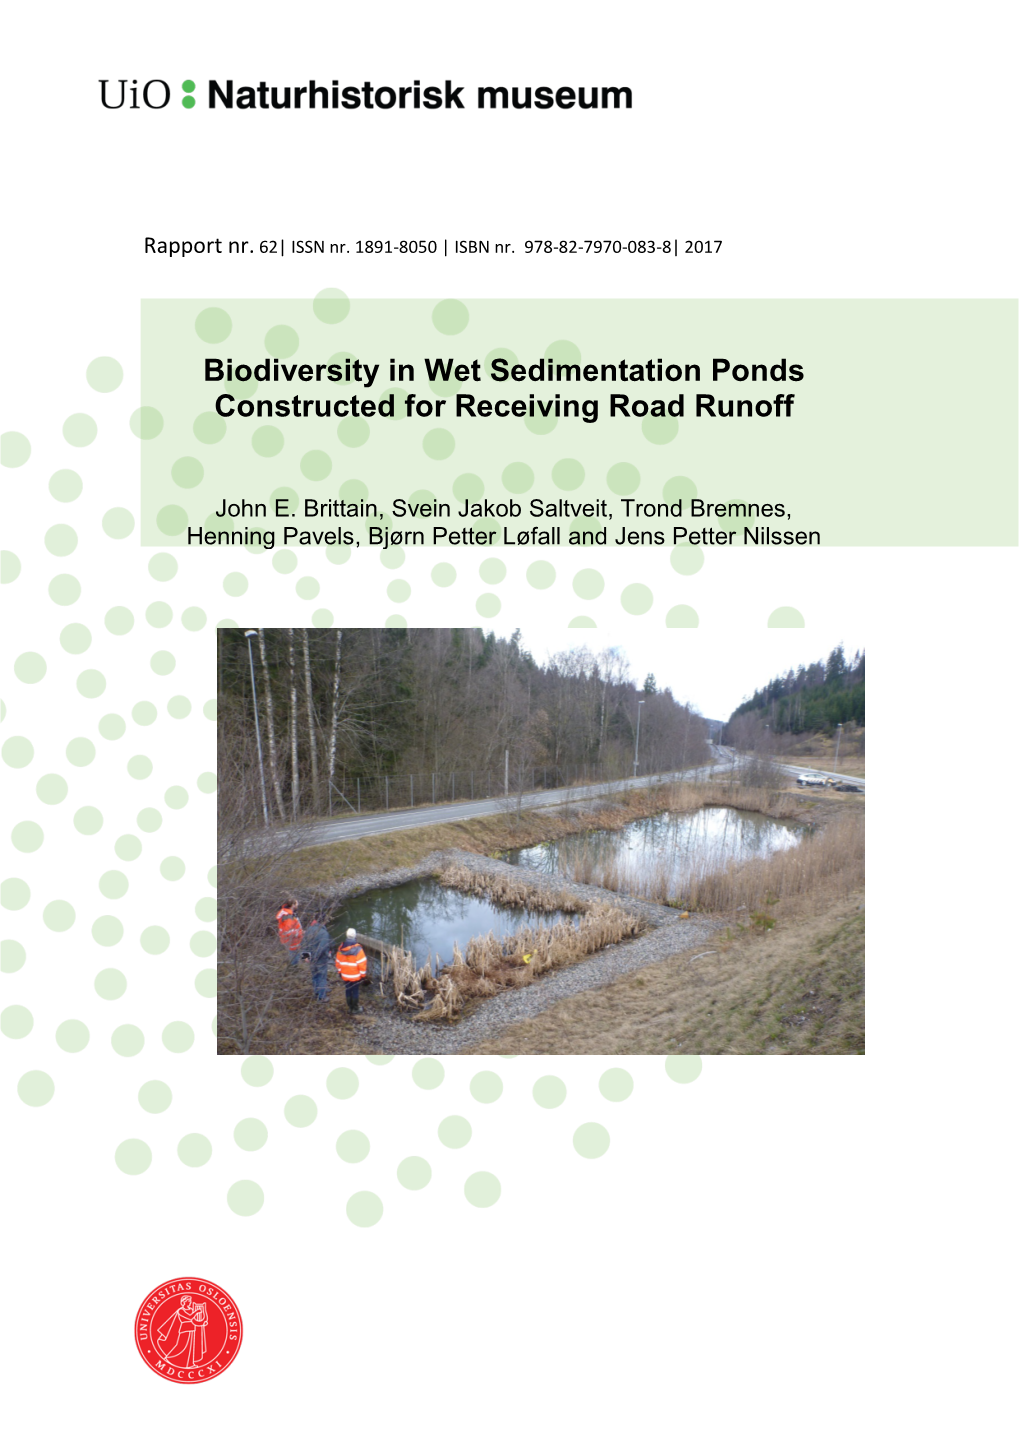 Biodiversity in Wet Sedimentation Ponds Constructed for Receiving Road Runoff